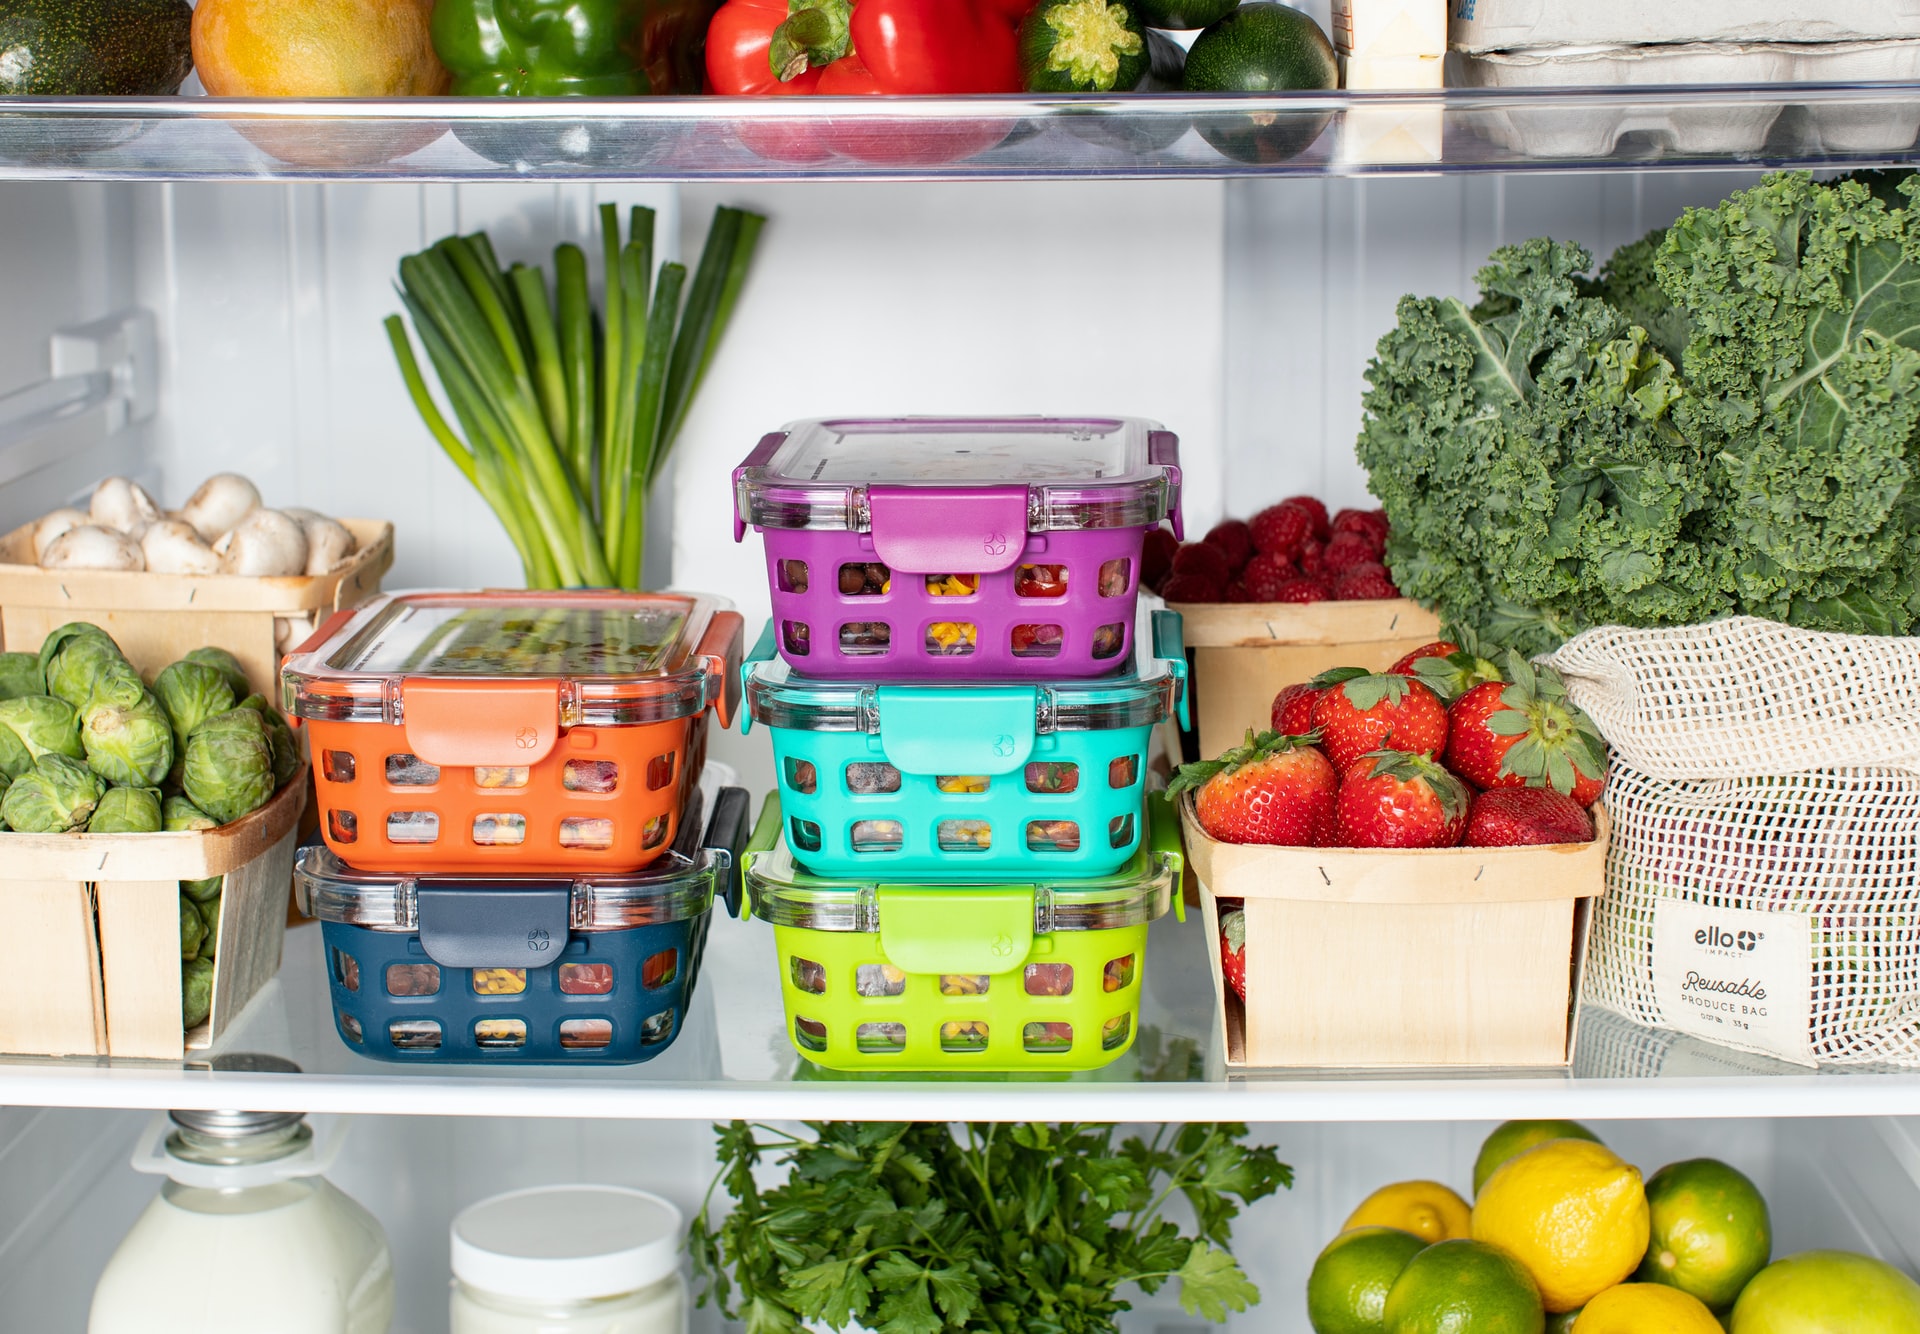 Fridge Storage Hacks To Extend the Life of Your Food